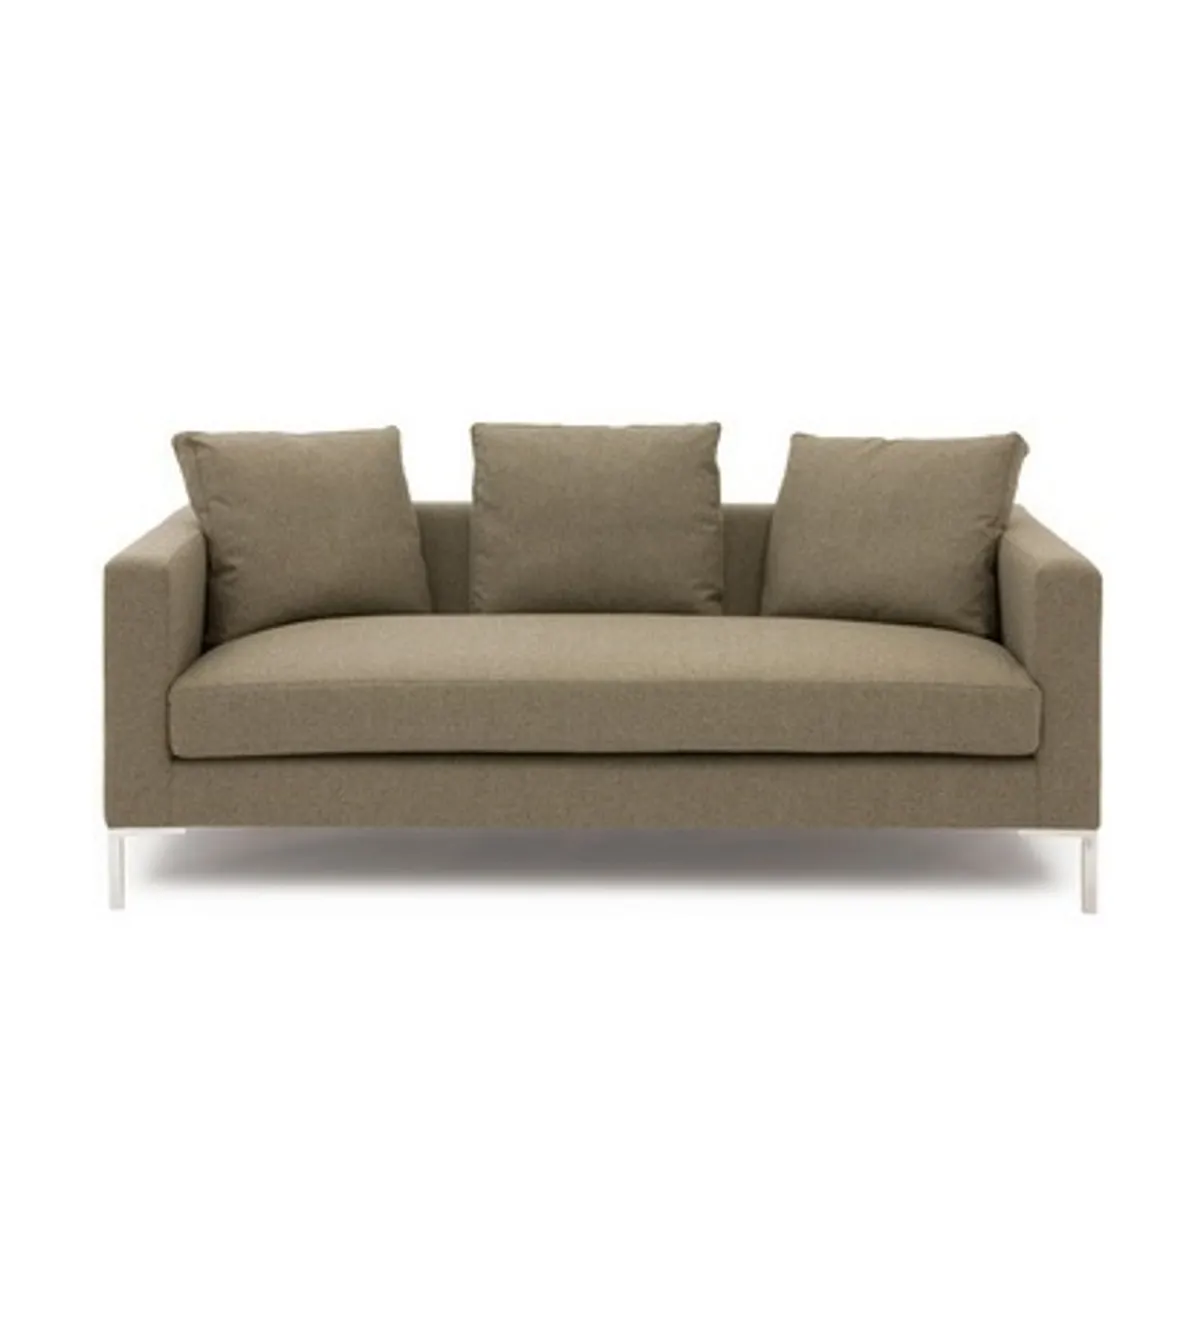 Bilbao Sofa By Inside Out Contracts